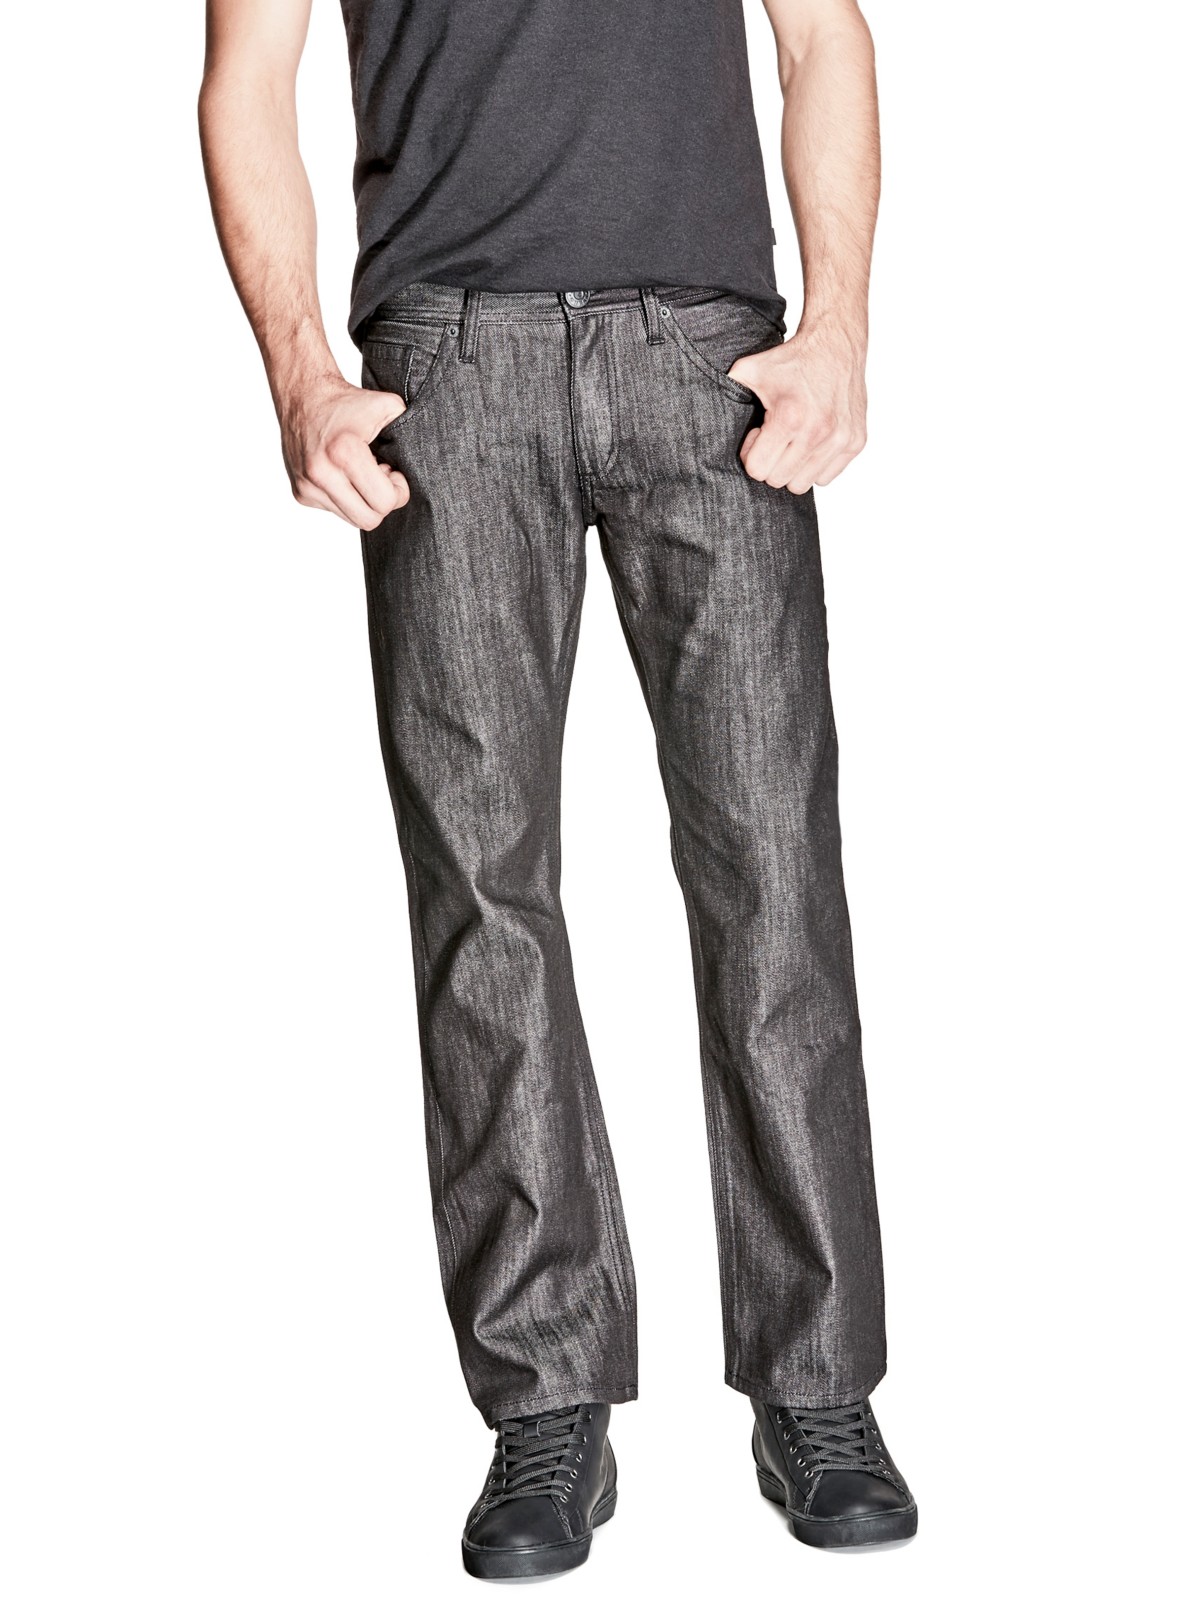 GUESS Men's Rowland Relaxed Straight Leg Jeans - Black Wash